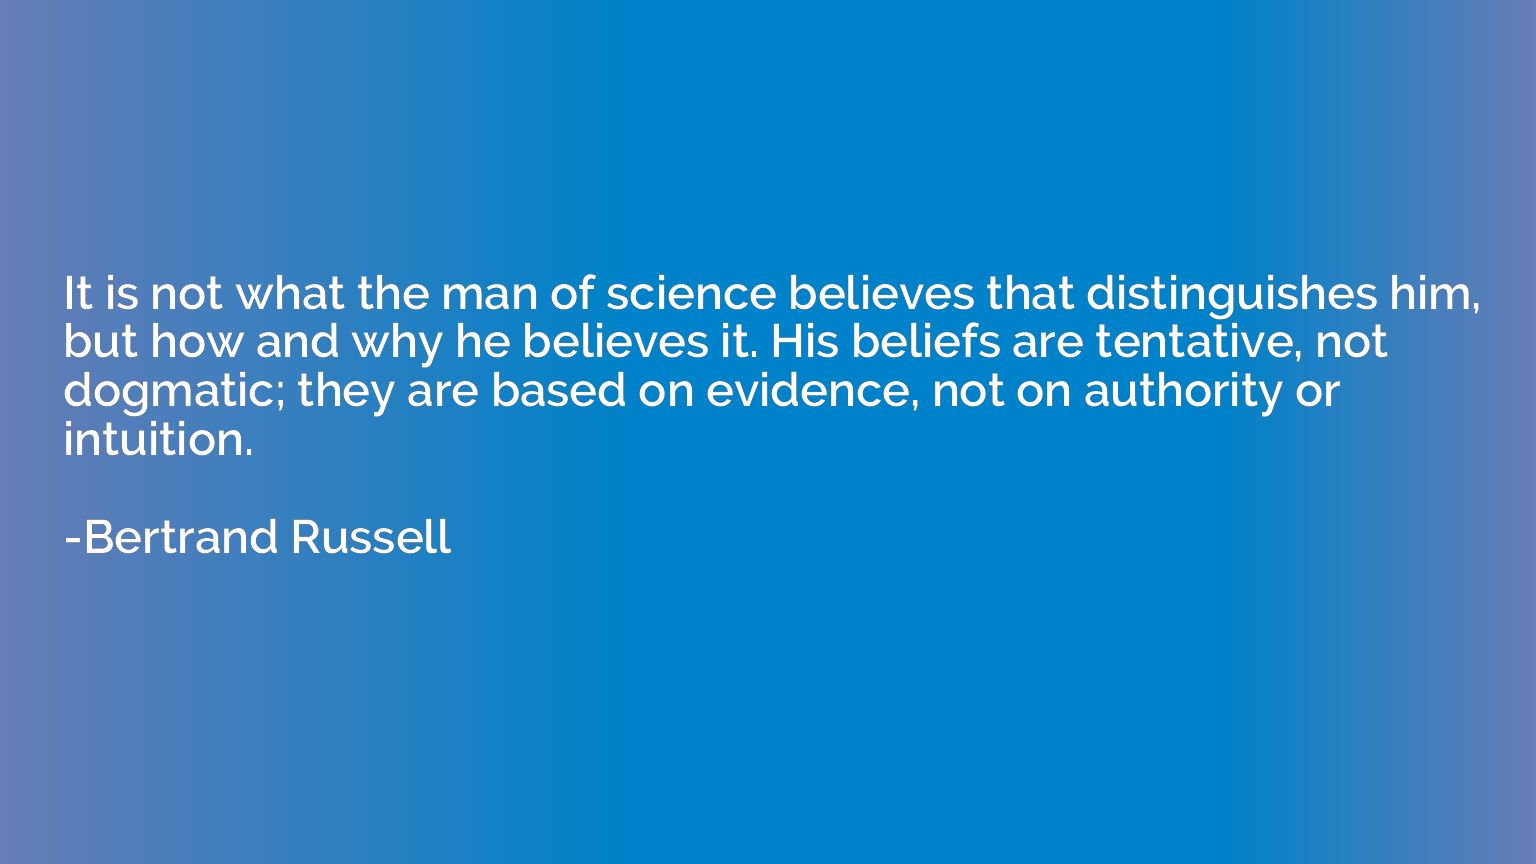 It is not what the man of science believes that distinguishe